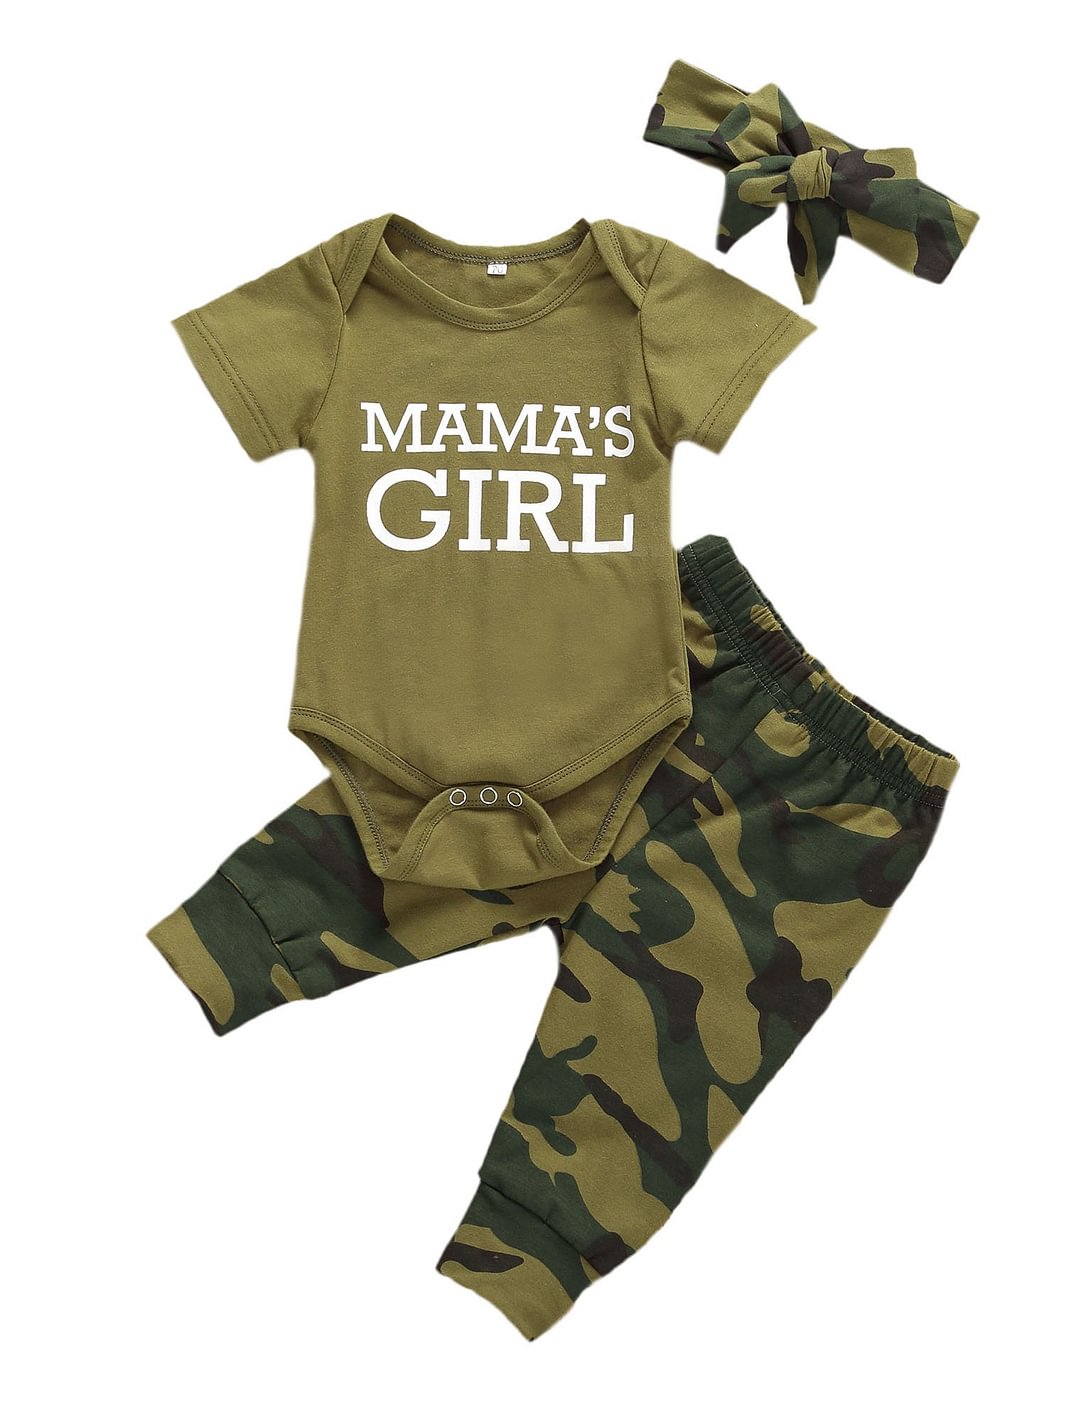 Newborn Baby Girl Boy Clothes Mommy Sayings Top Printed T-Shirt Camouflage Pants+Hats Romper Outfit Set